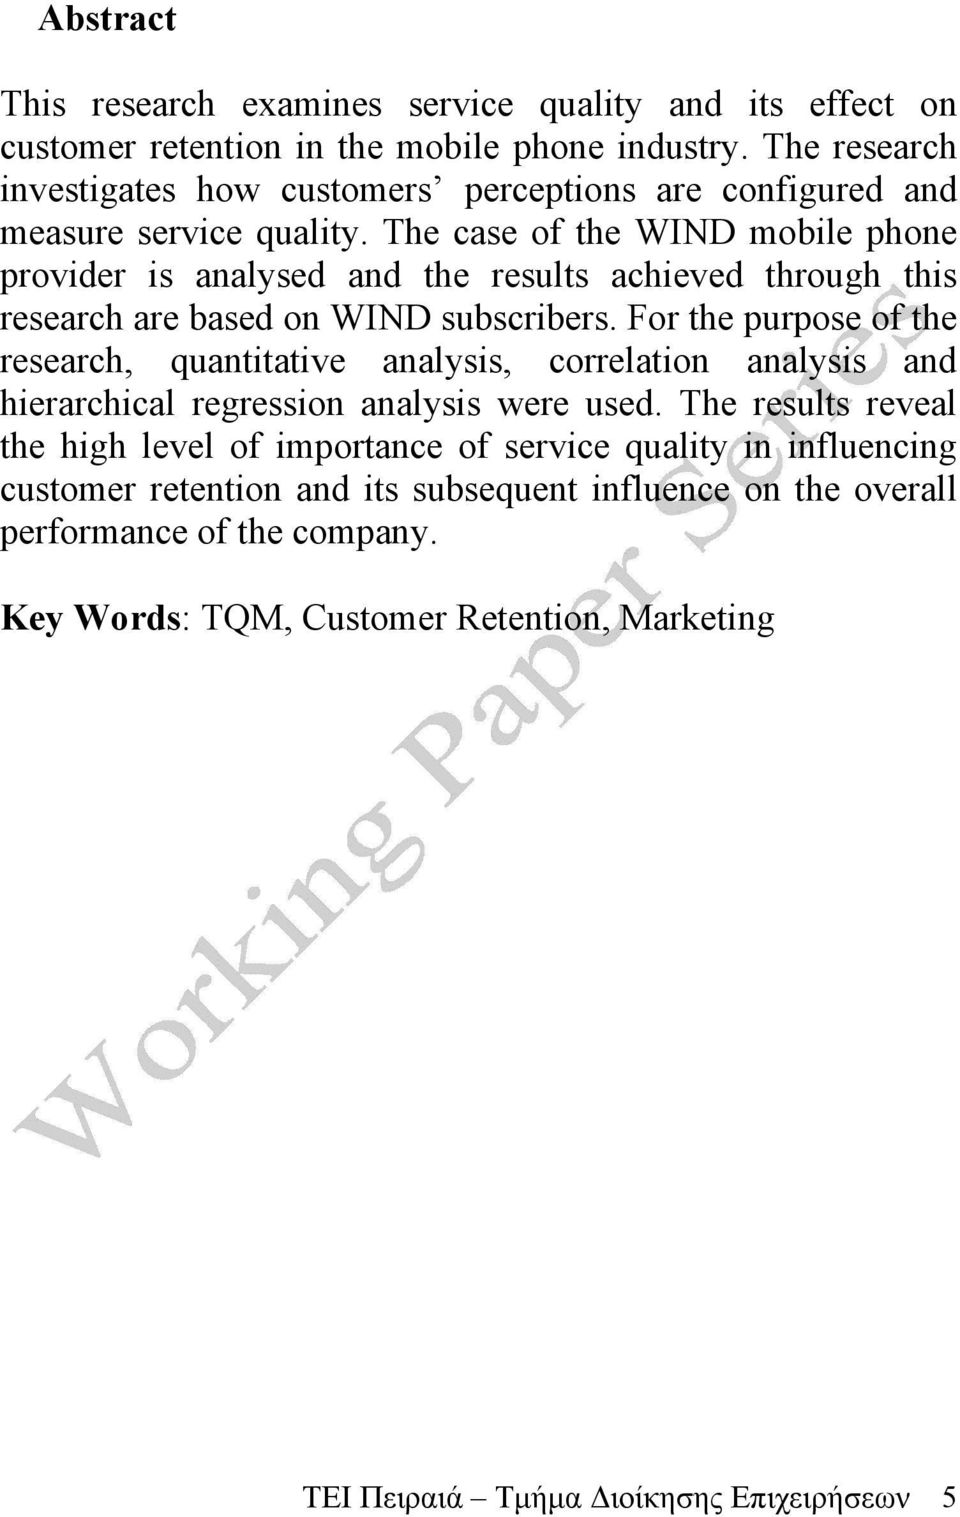 The case of the WIND mobile phone provider is analysed and the results achieved through this research are based on WIND subscribers.